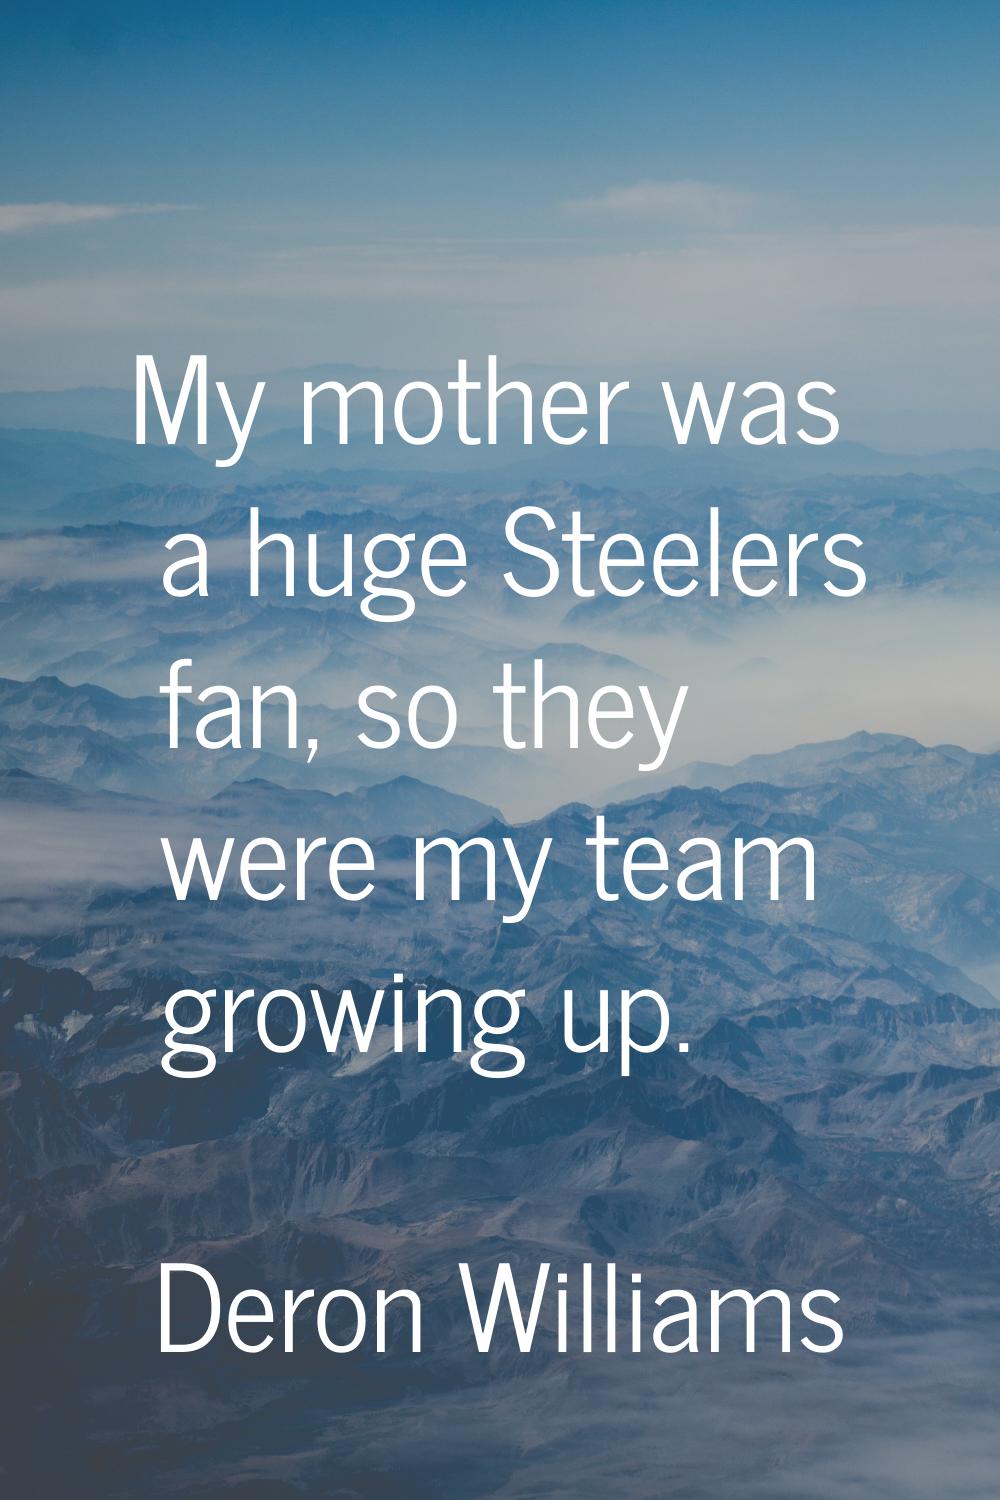 My mother was a huge Steelers fan, so they were my team growing up.